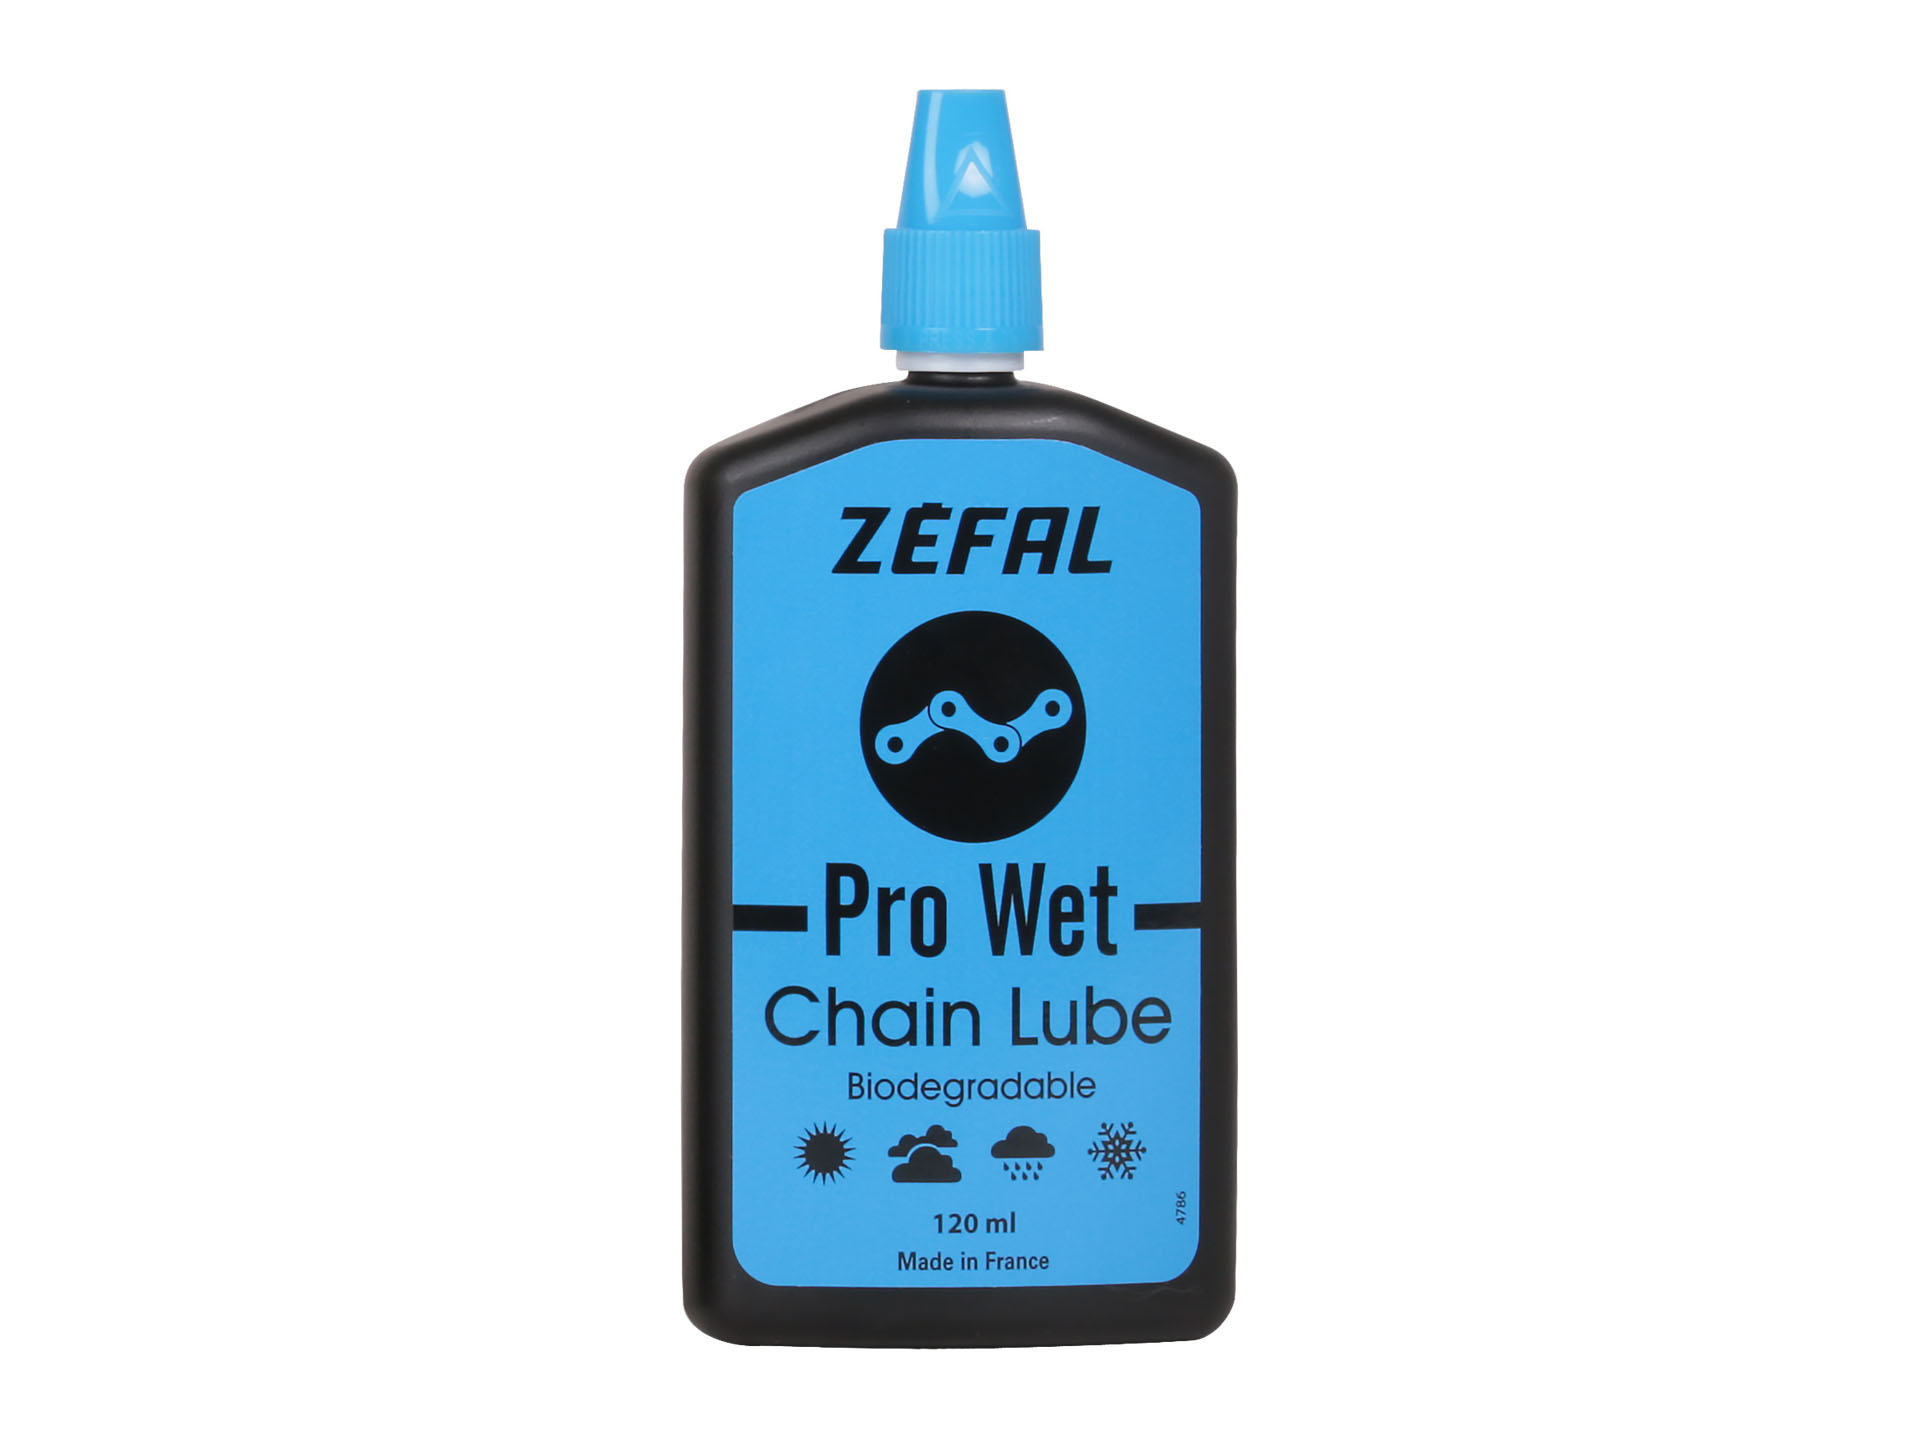 Zefal Pro Wet Lube 120ml *Made in France